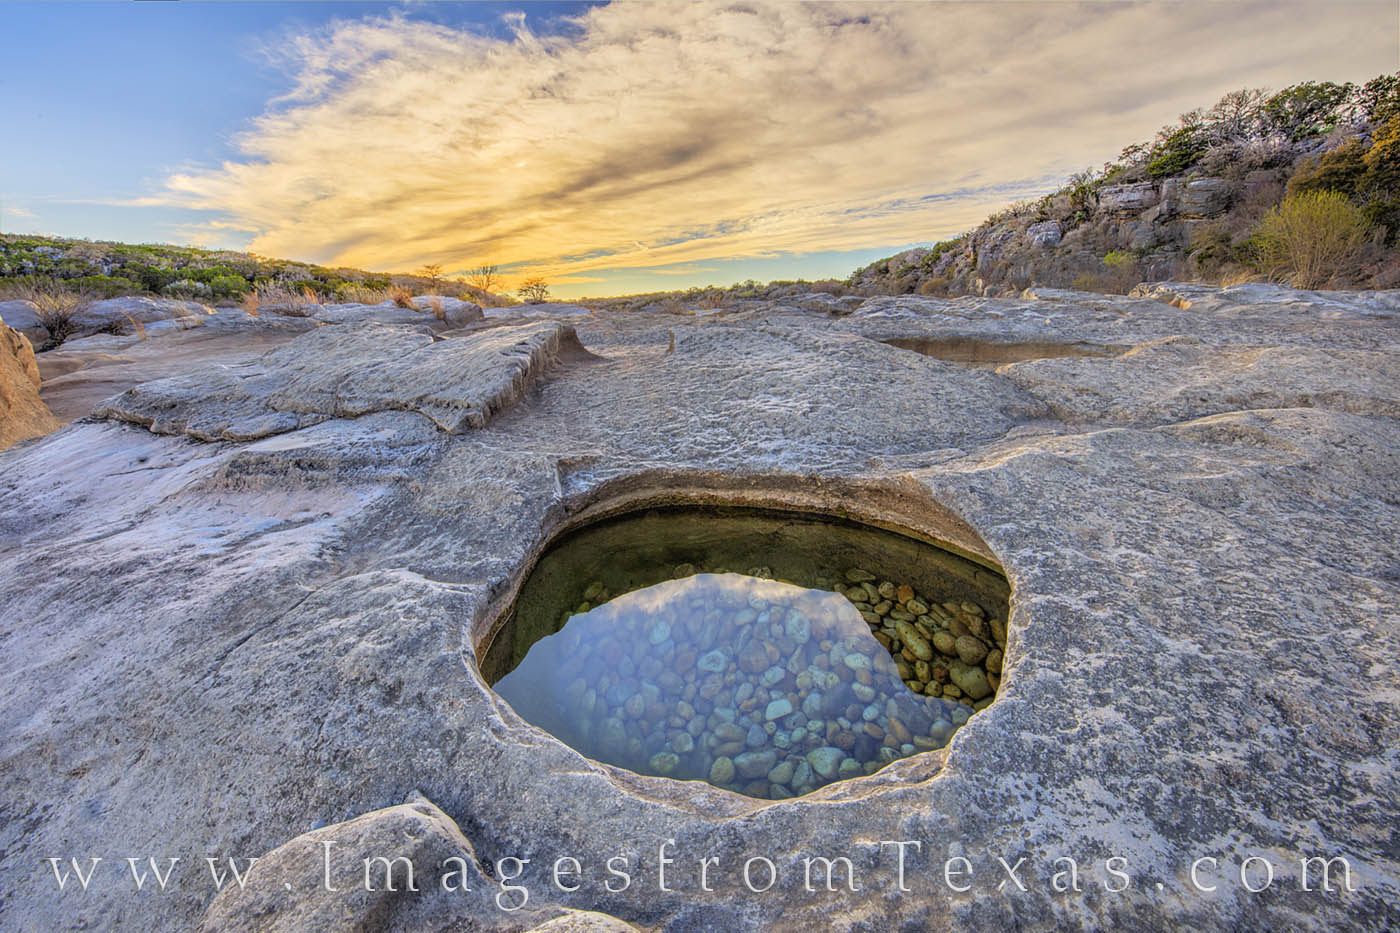 A small rock pool at Pedernales Falls State Park holds colorful, smooth pebbles in its clear water.